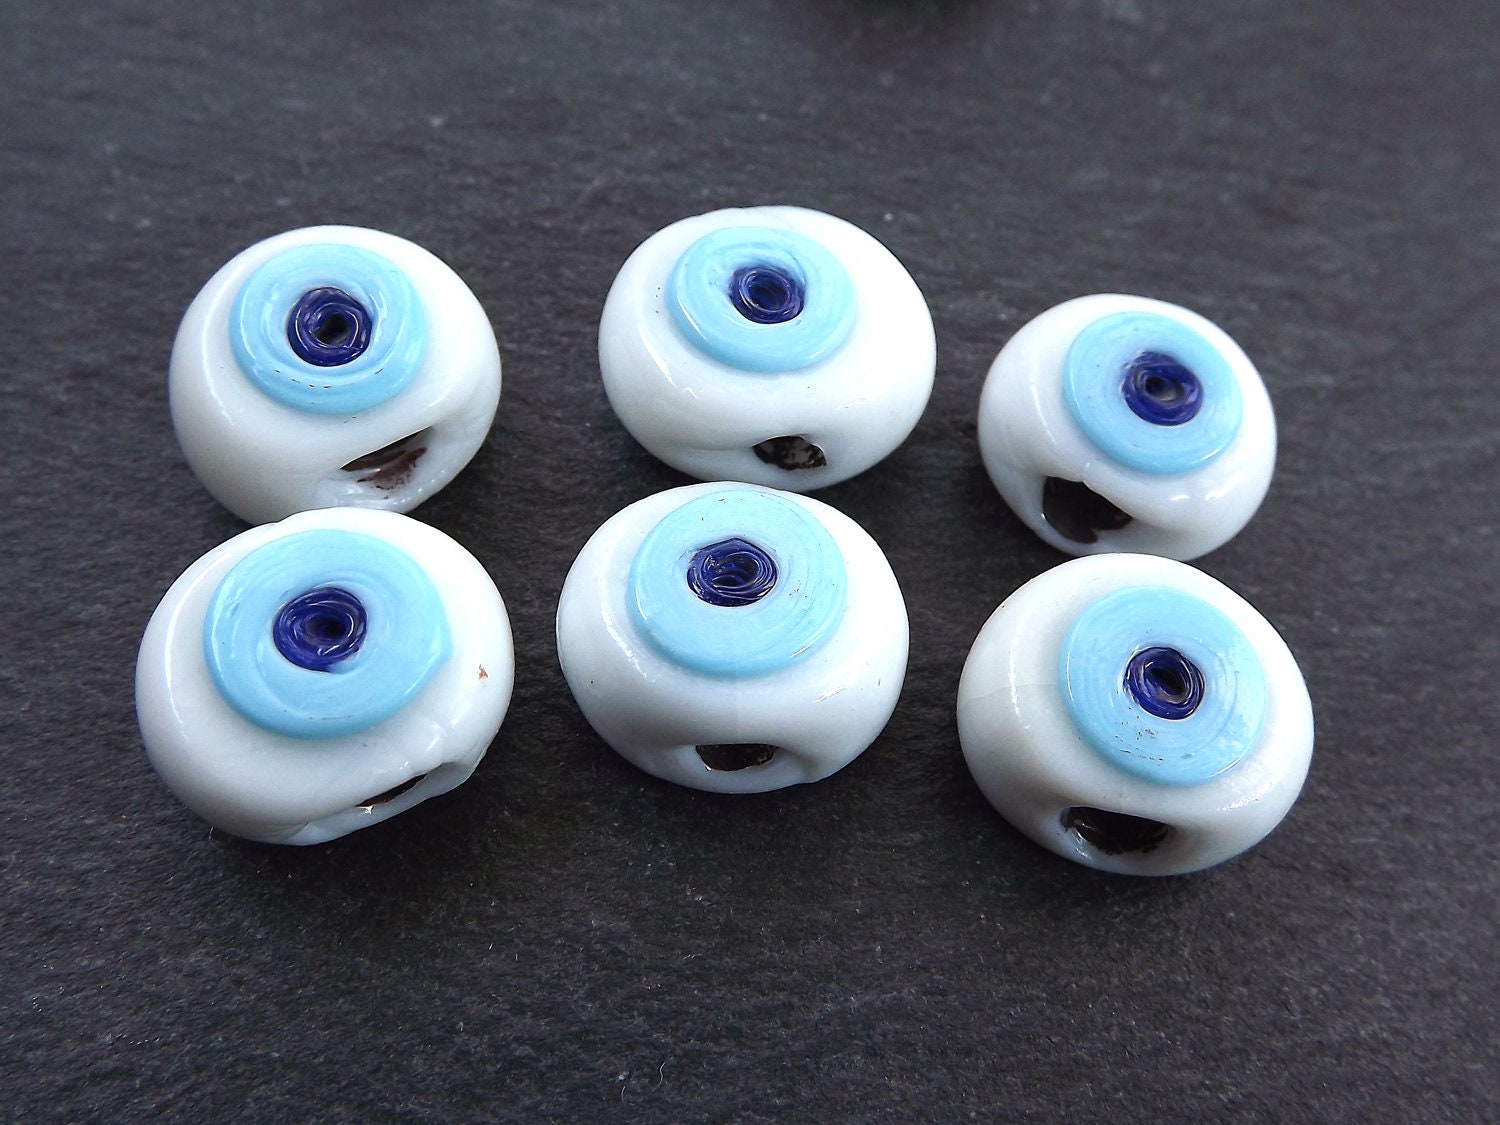 Vintage blue, yellow and white Turkish Evil Eye beads. – Earthly